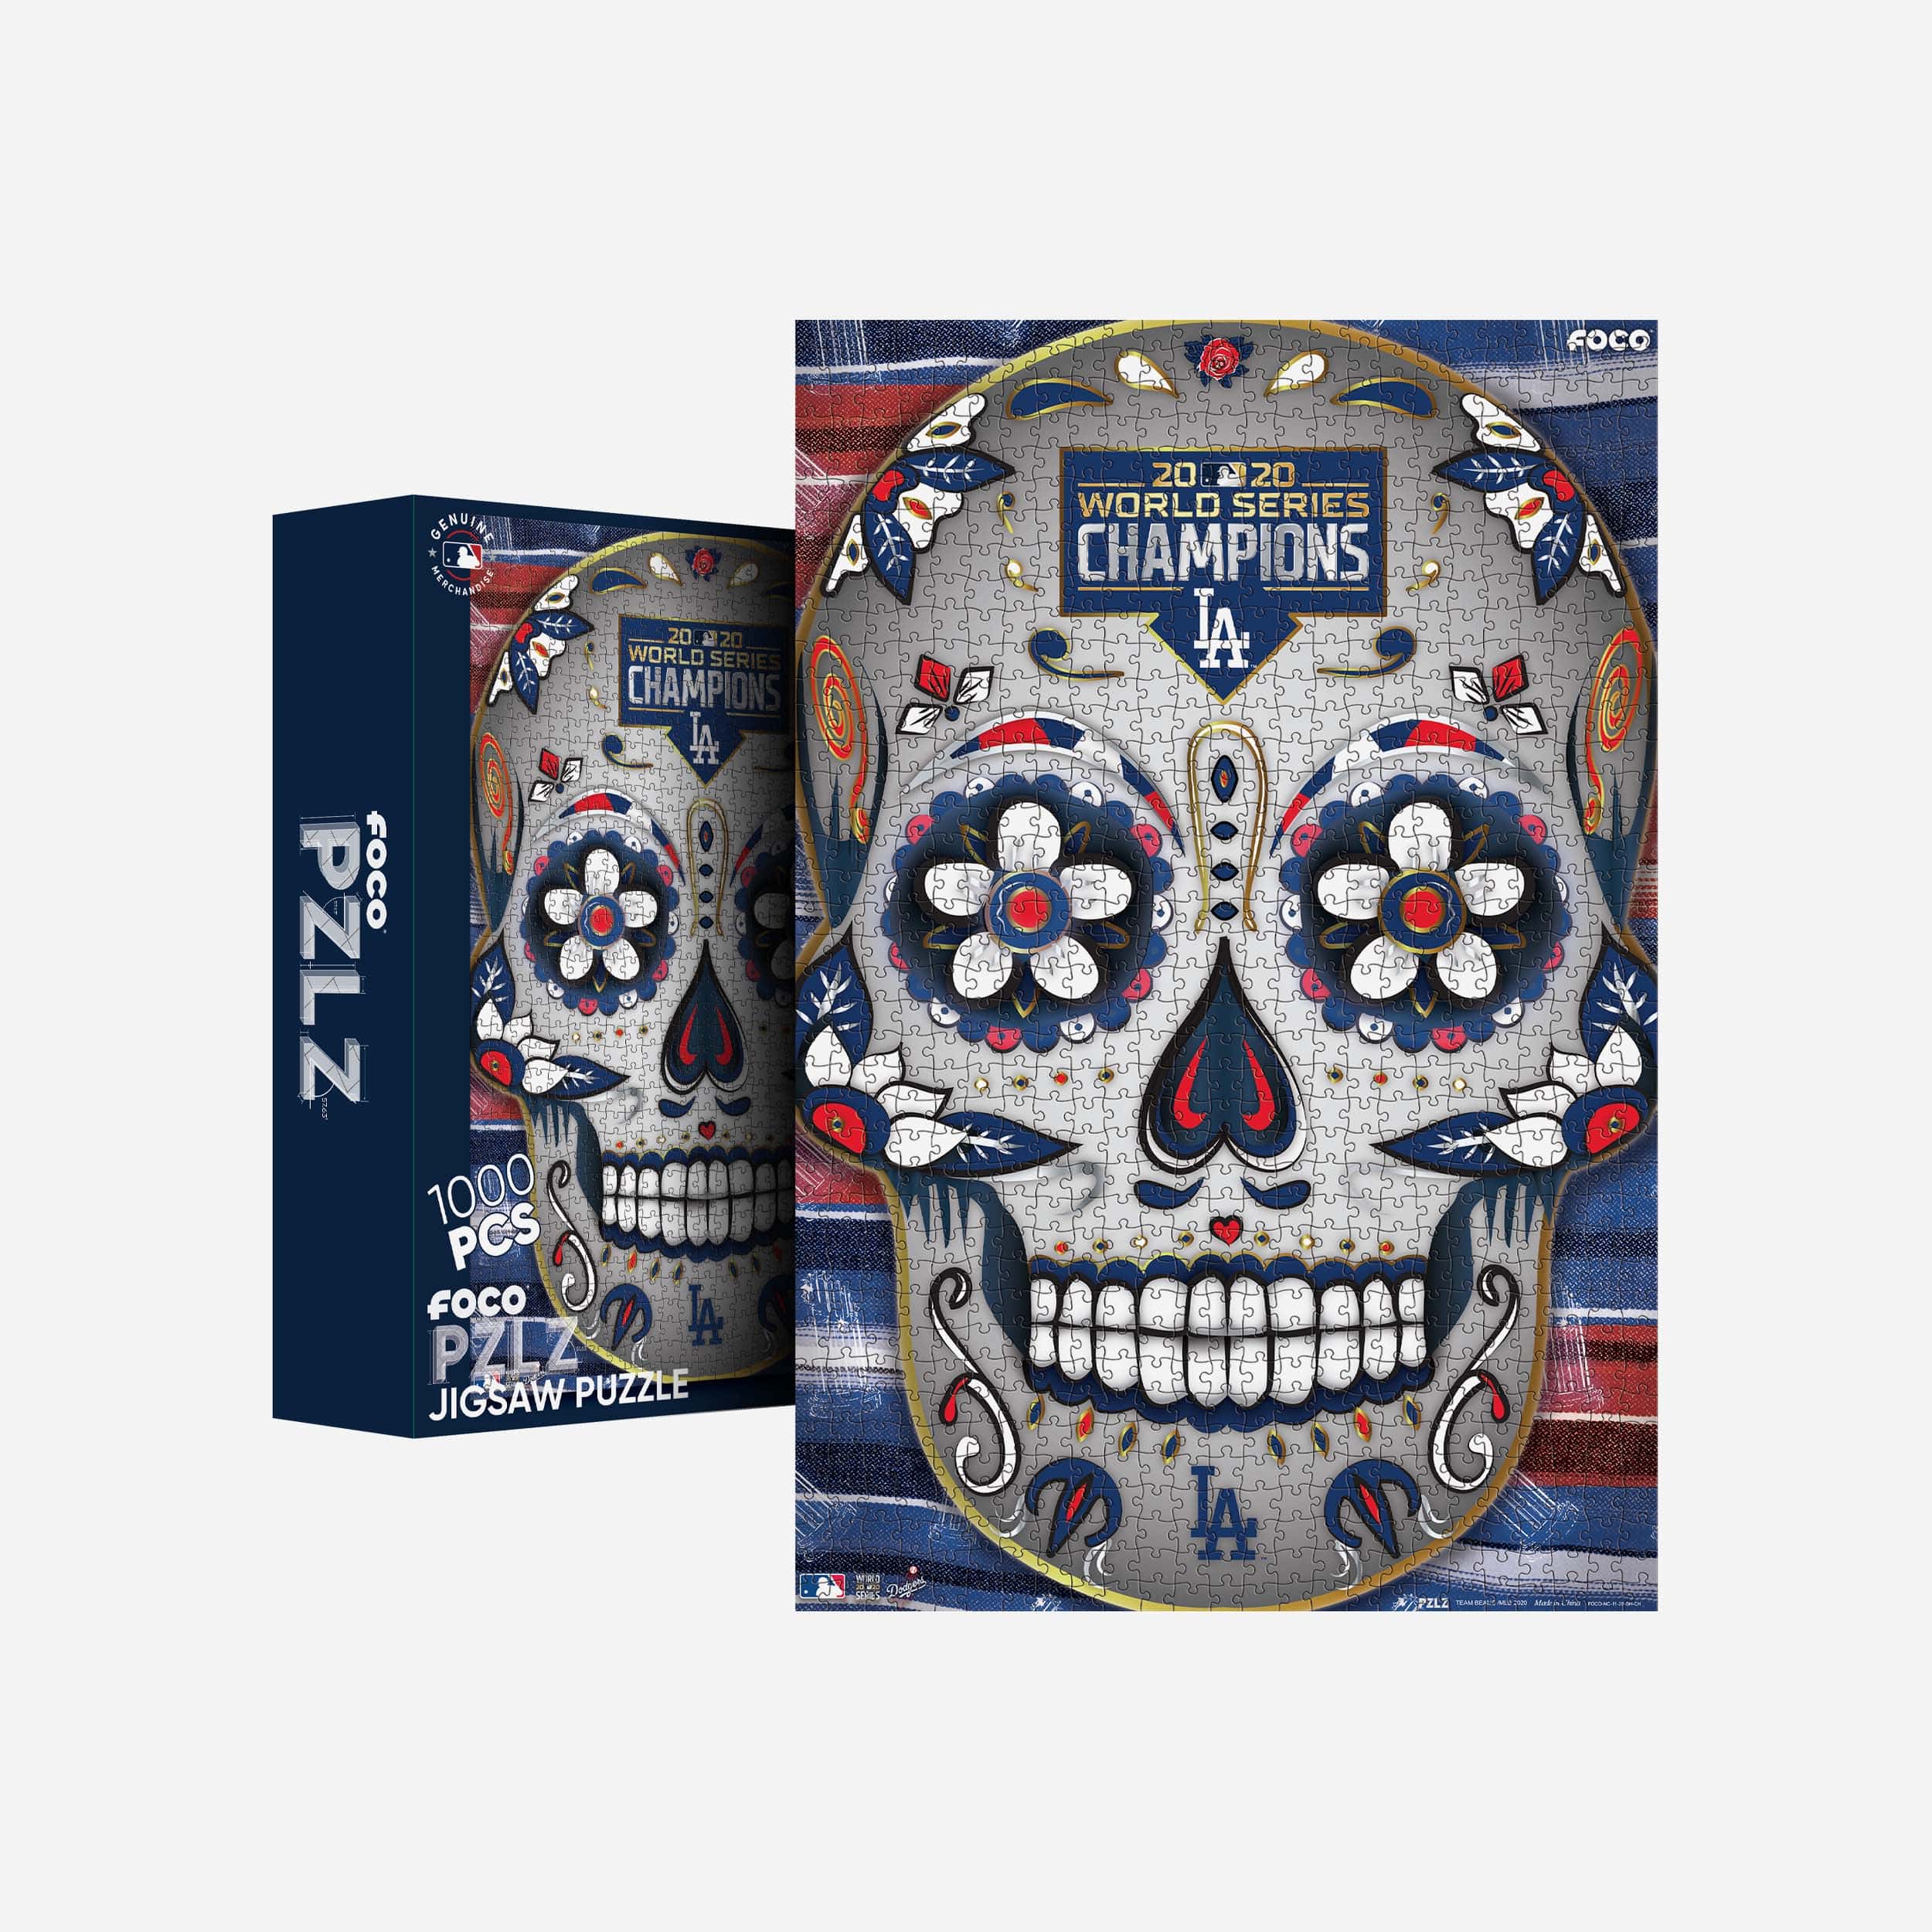 FOCO Los Angeles Dodgers 2020 World Series Champions Day Of The Dead 1000 Piece Jigsaw PZLZ -